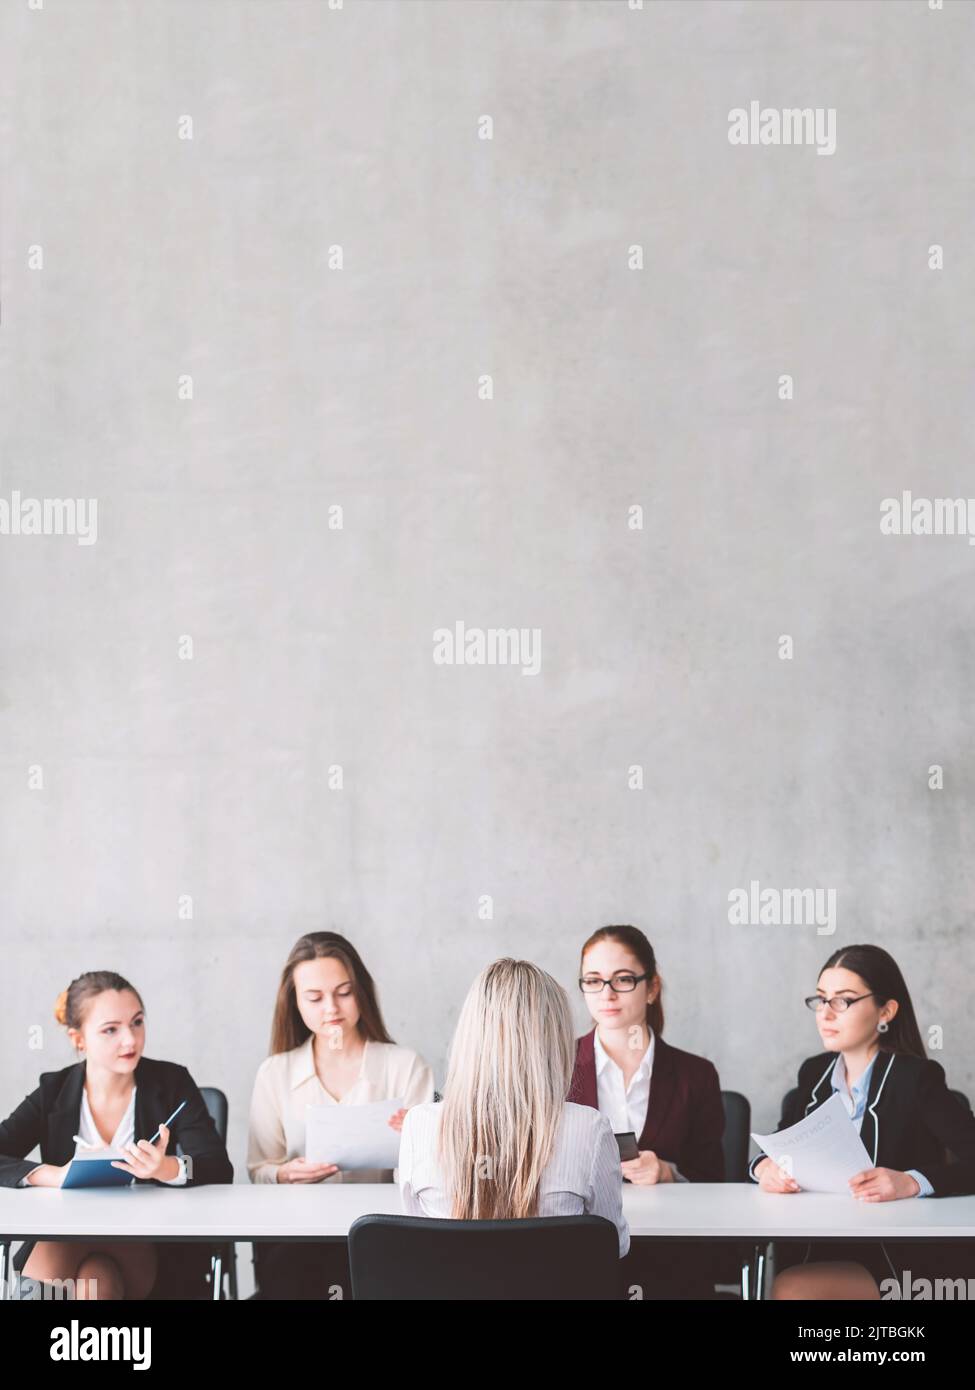 job interview female business support applicant Stock Photo